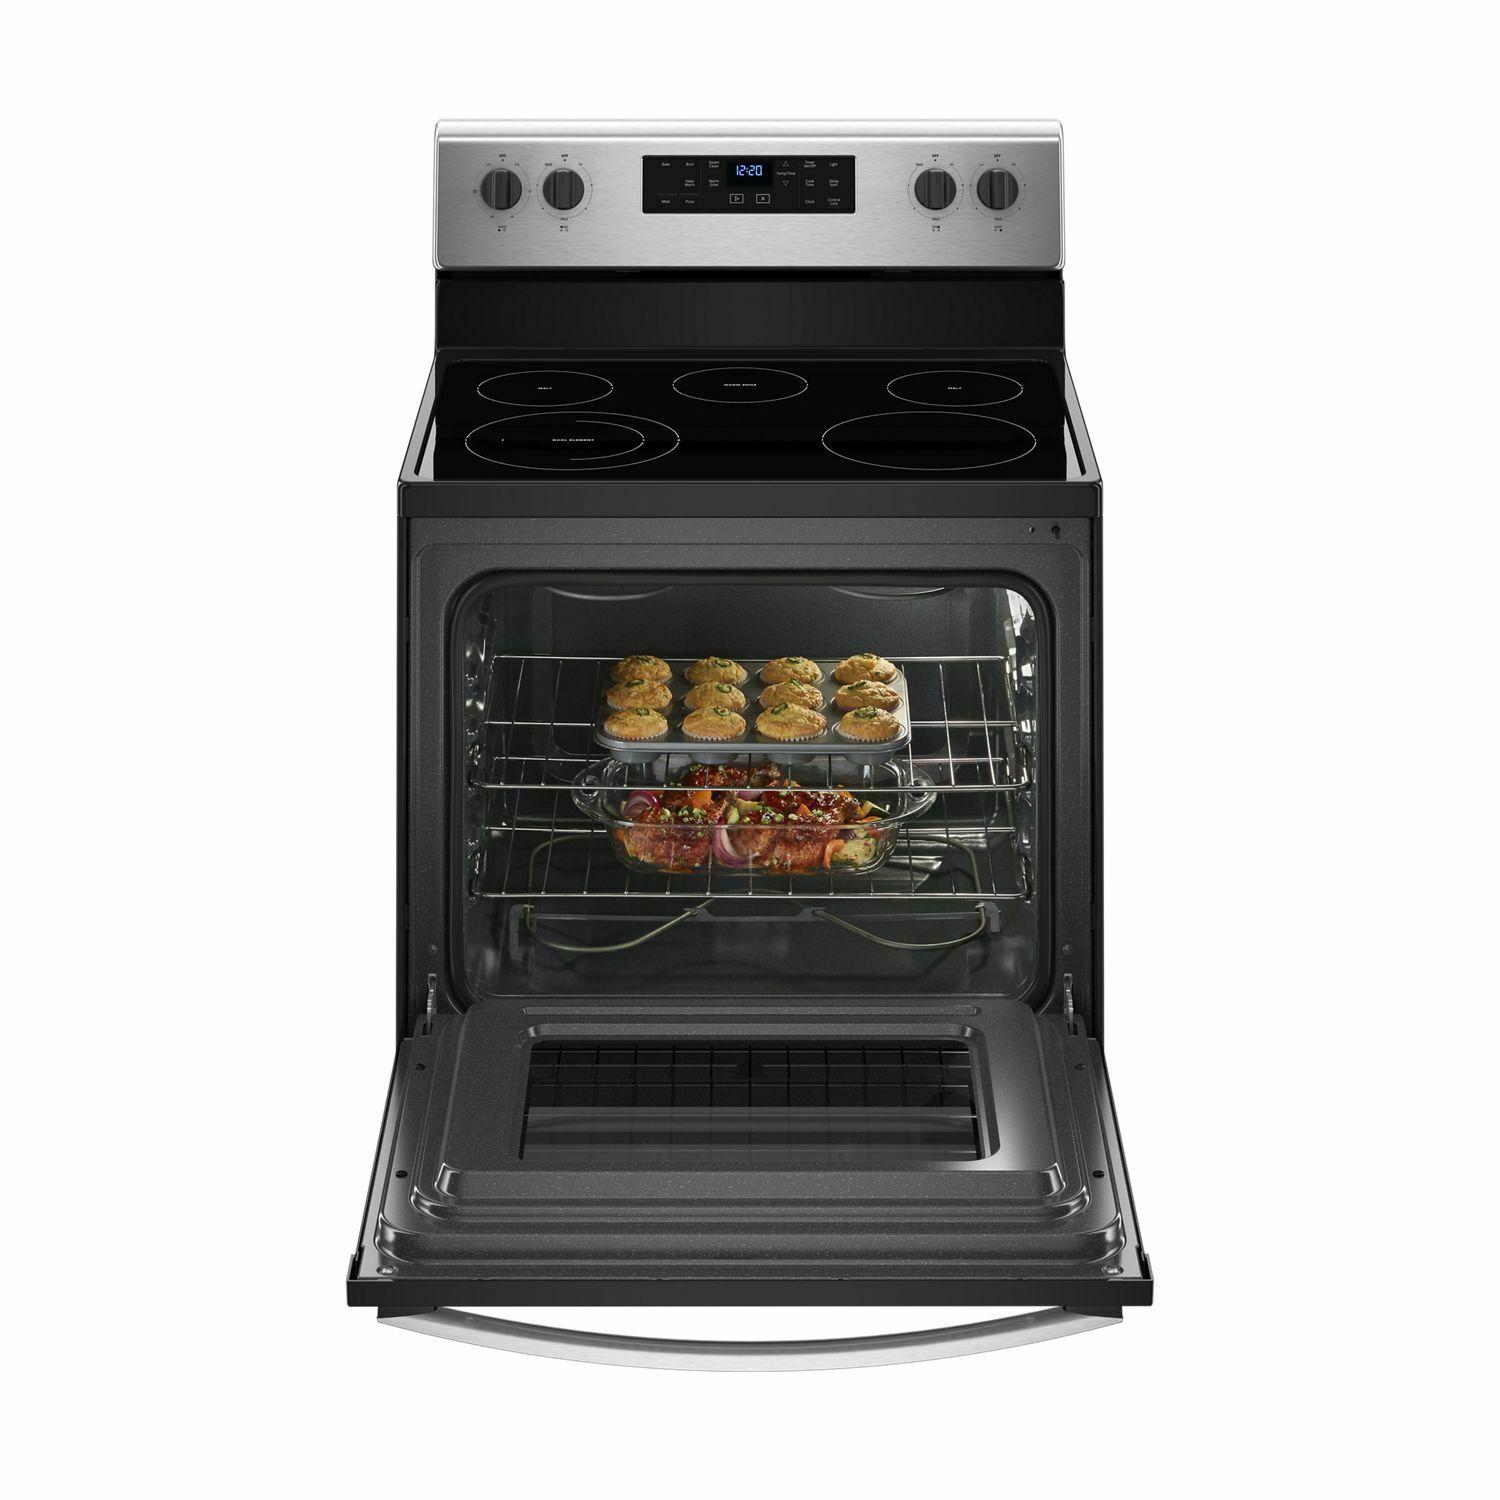 5.3 cu. ft. Freestanding Electric Range with 5 Elements - Black-on-Stainless